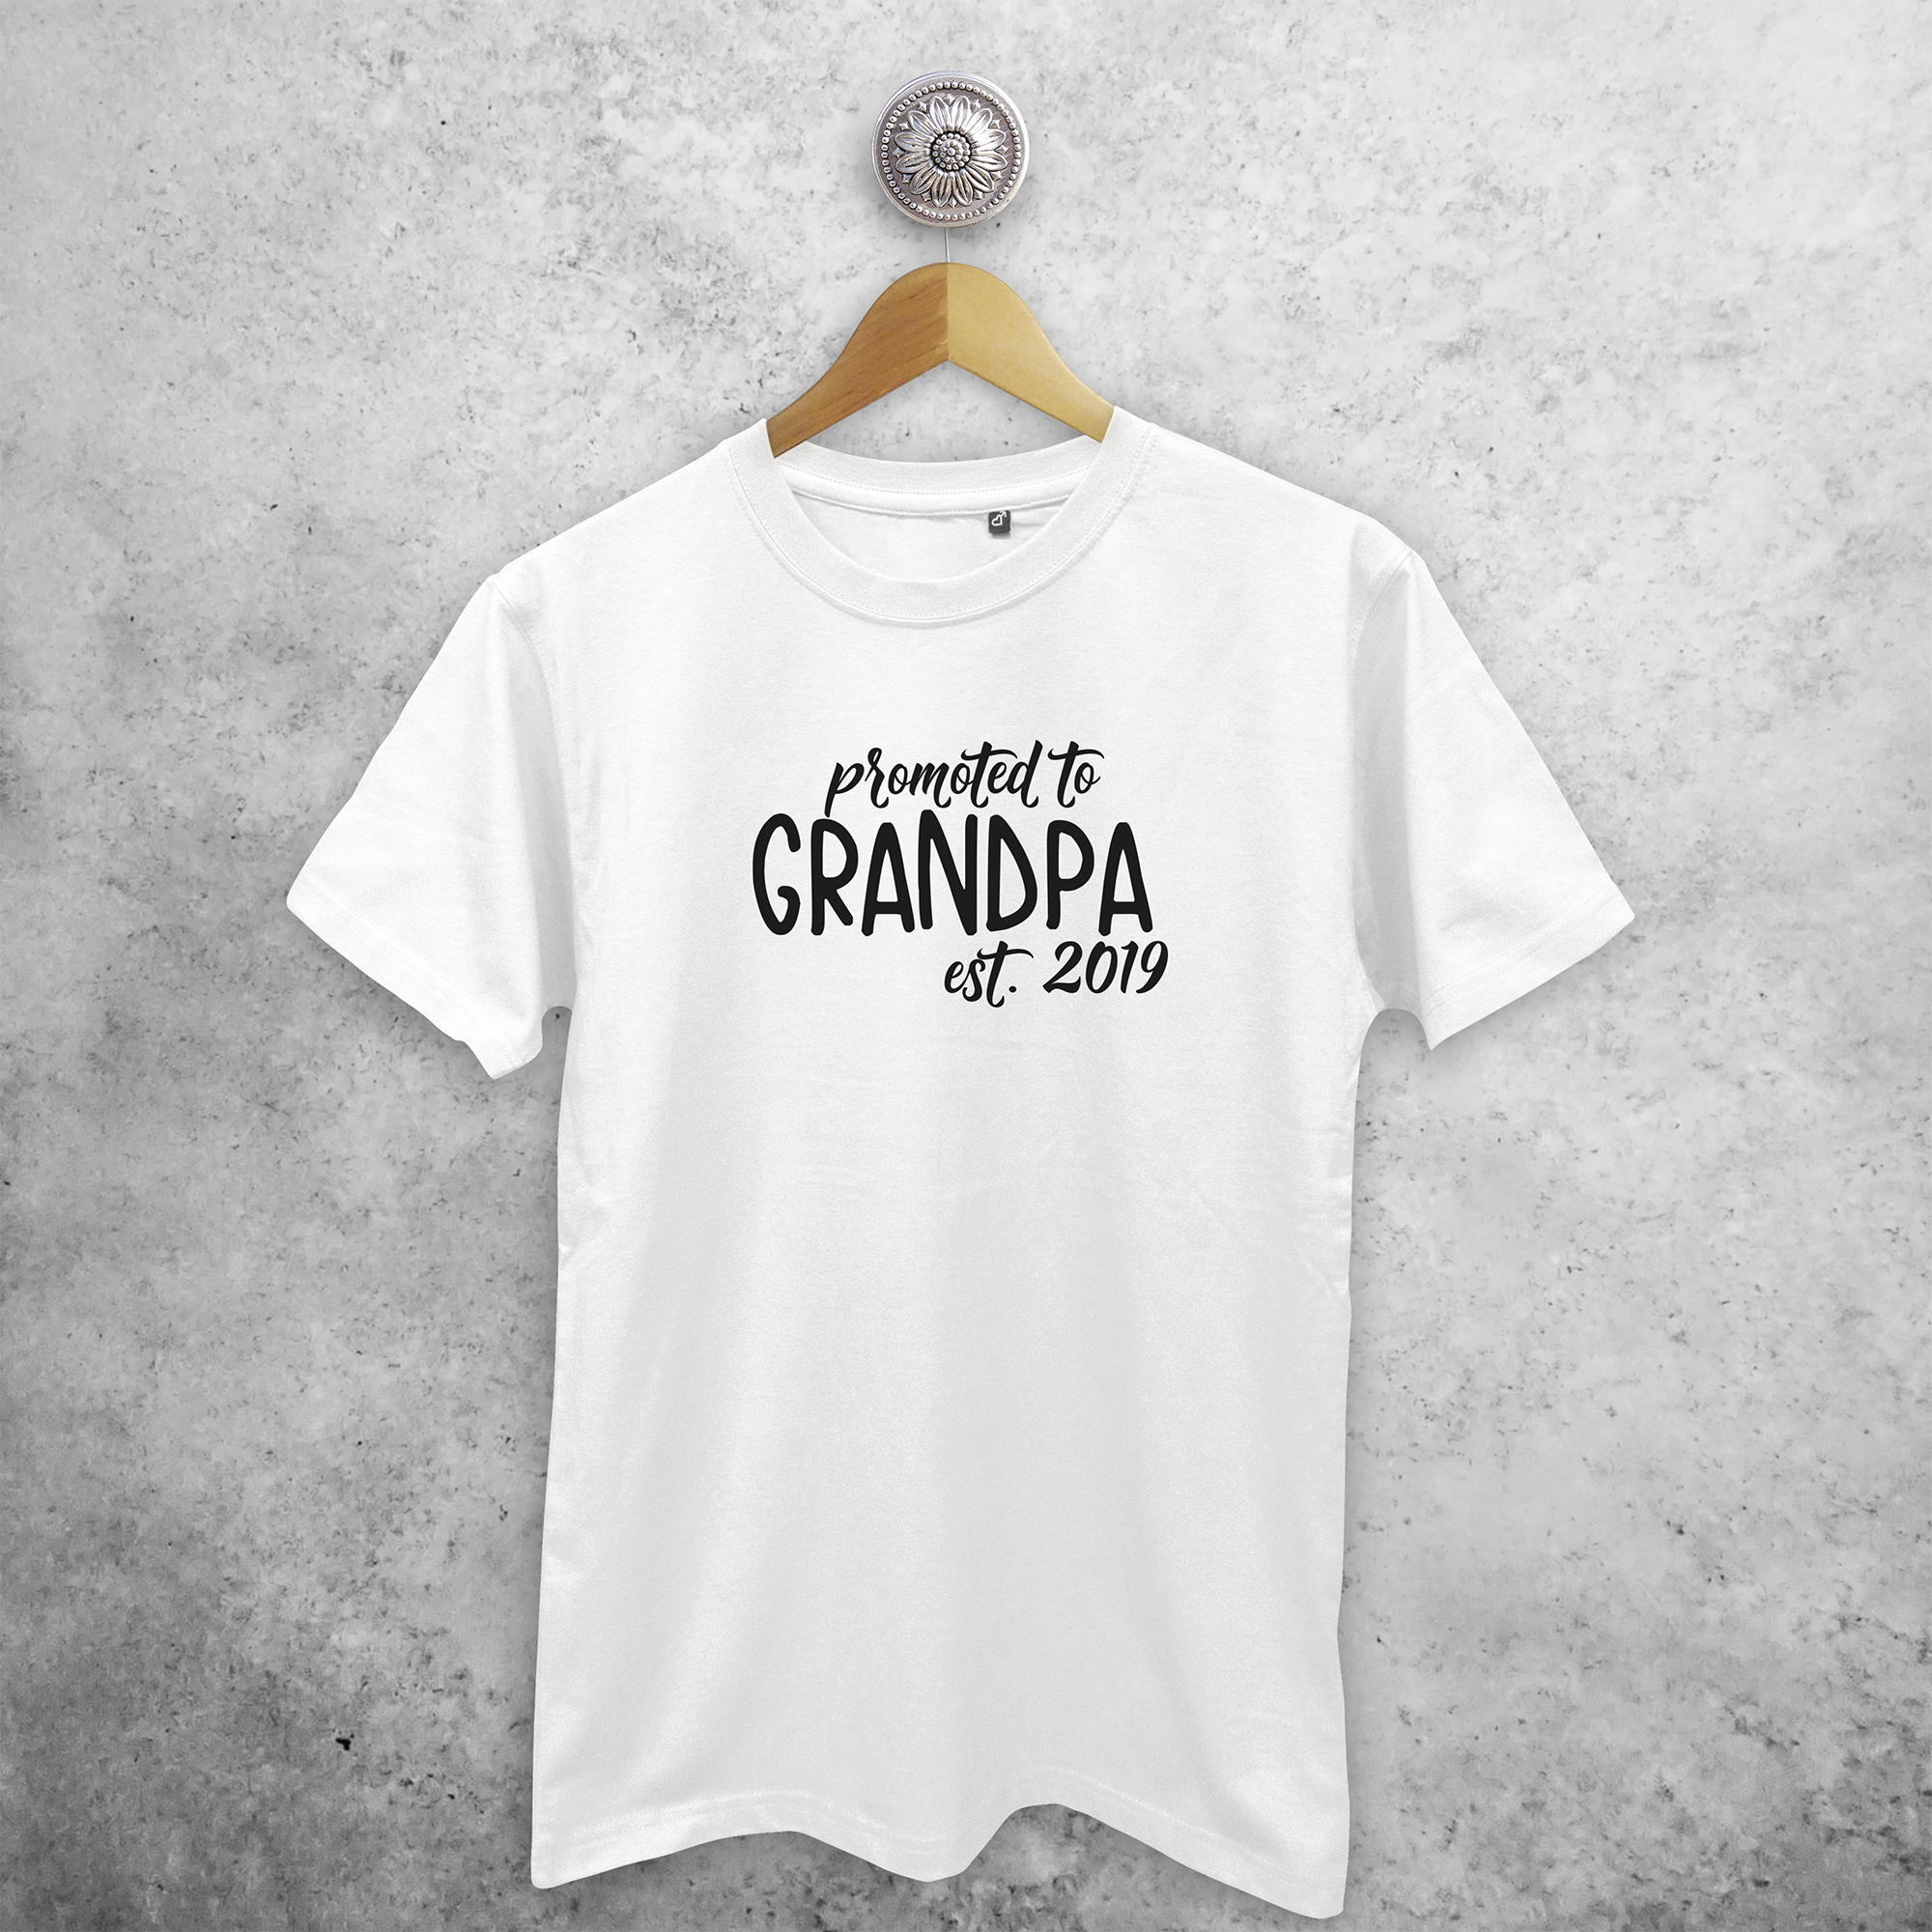 'Promoted to grandpa' adult shirt